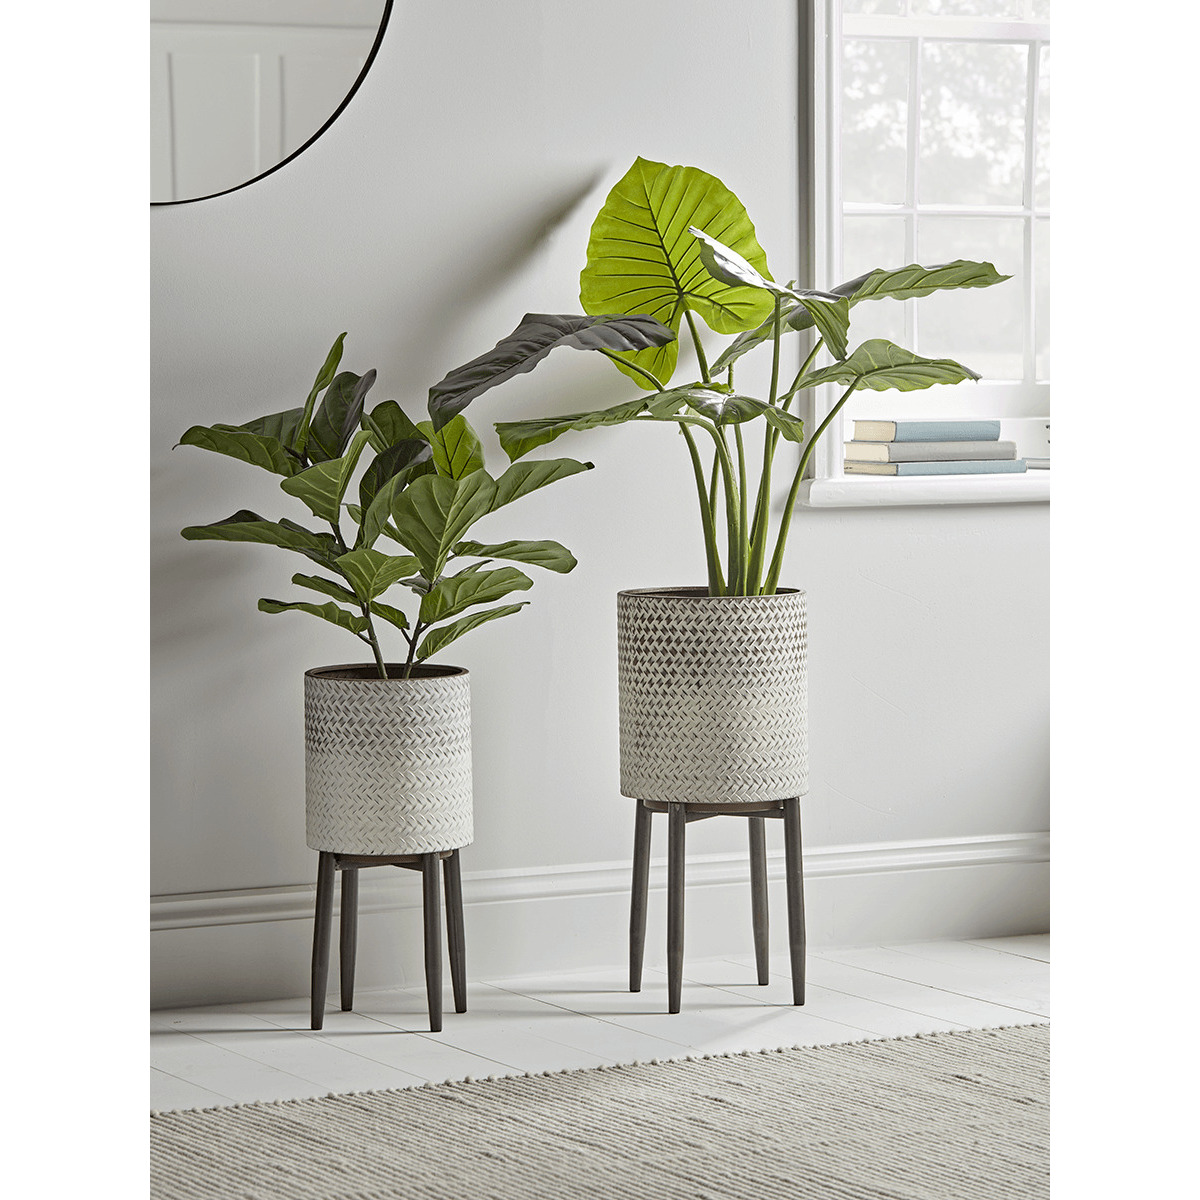 Ombre Whitewashed Standing Planter - Large - image 1